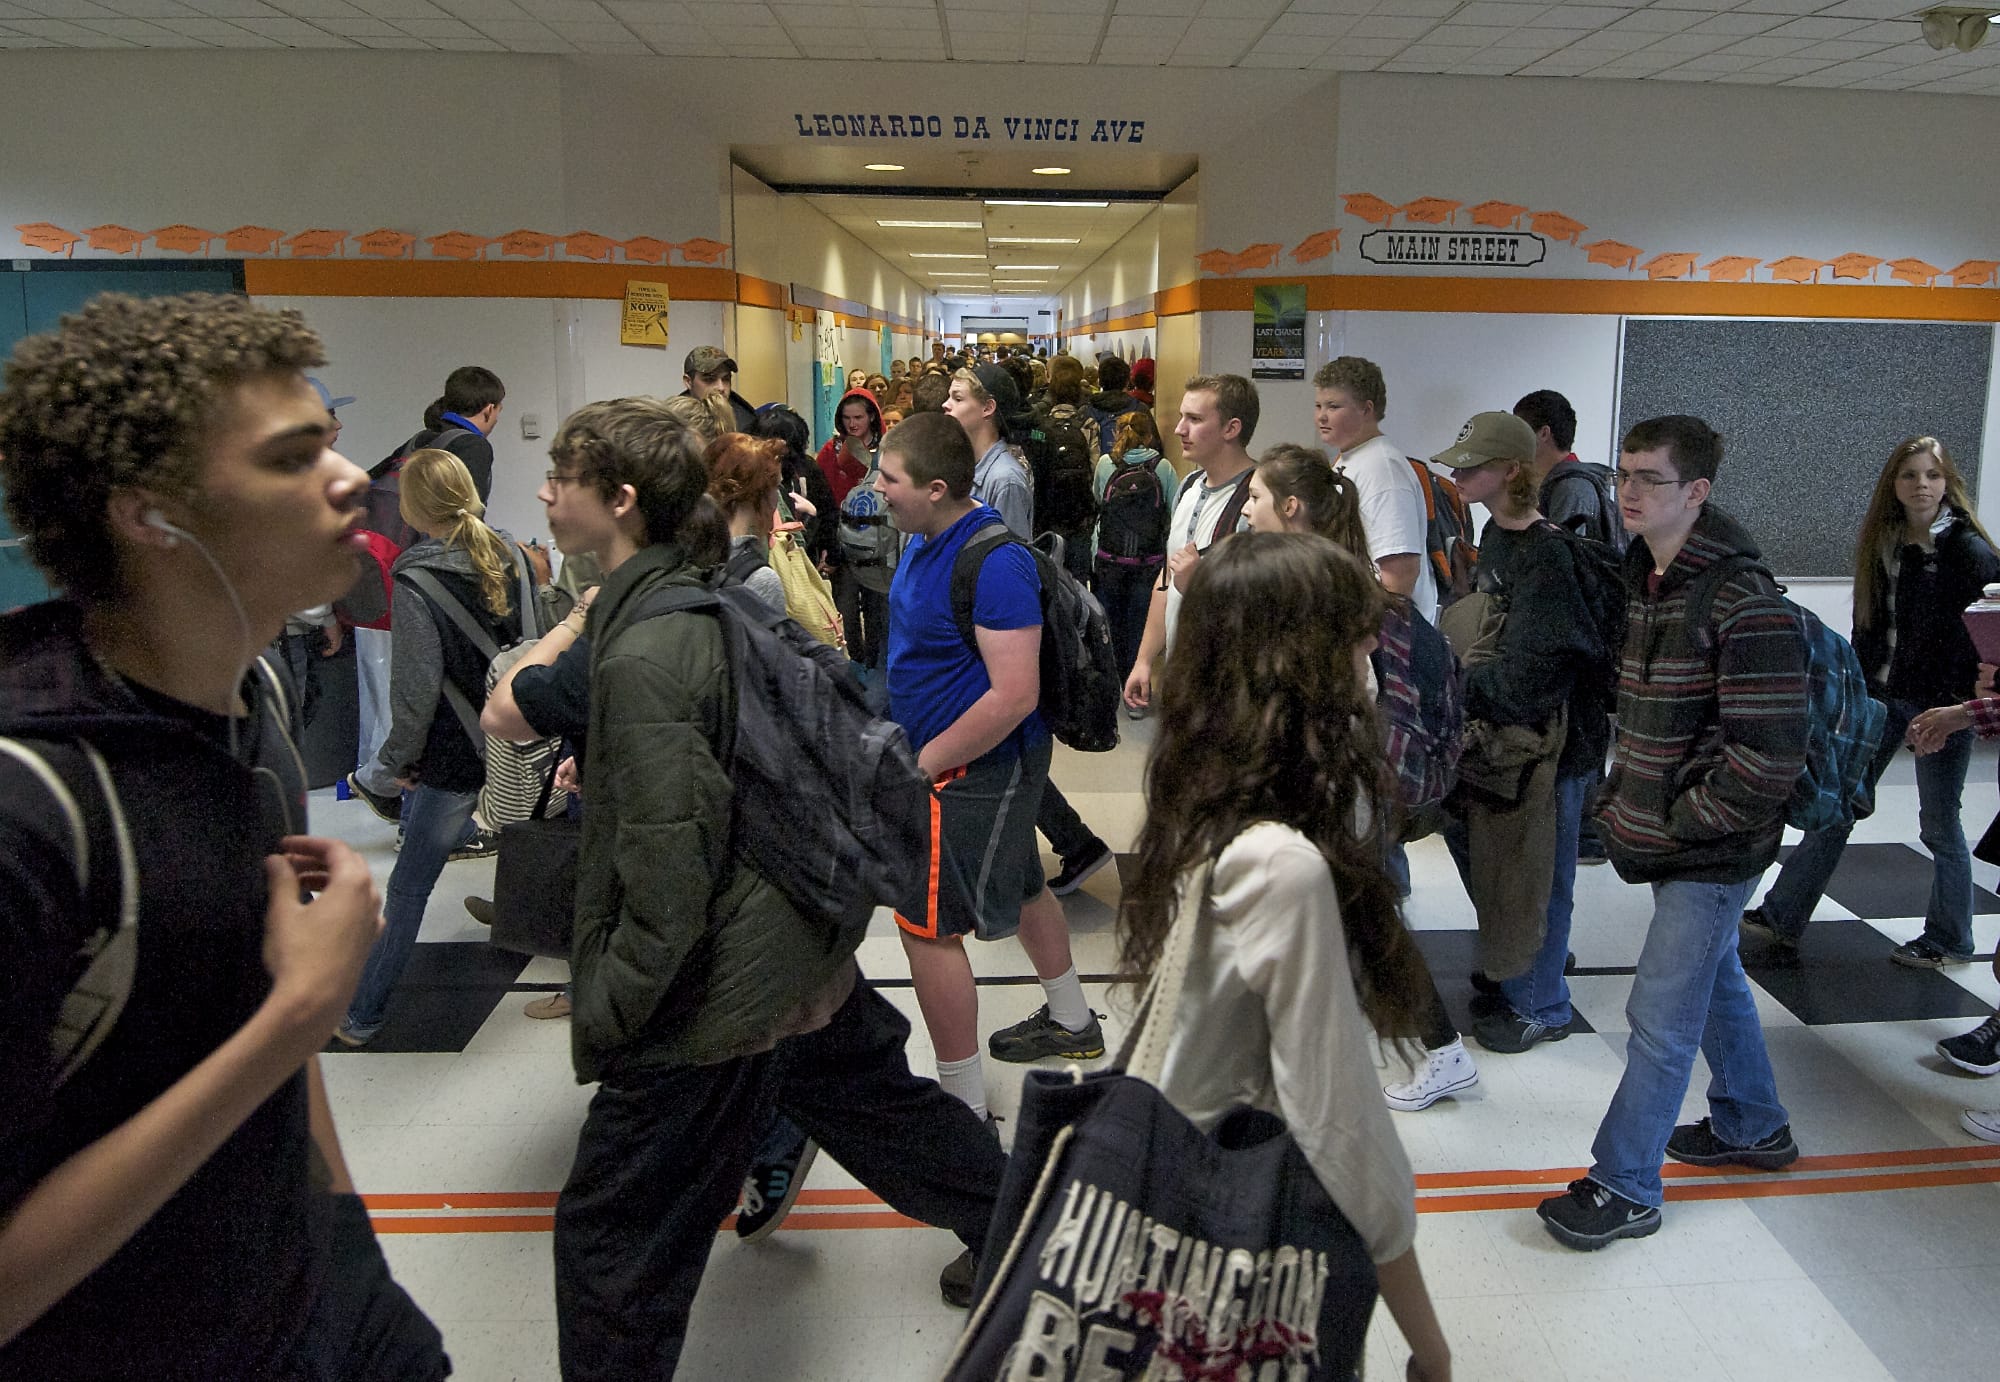 Hundreds of students fill the halls at Battle Ground High School on their way back to class after lunch on May 6.